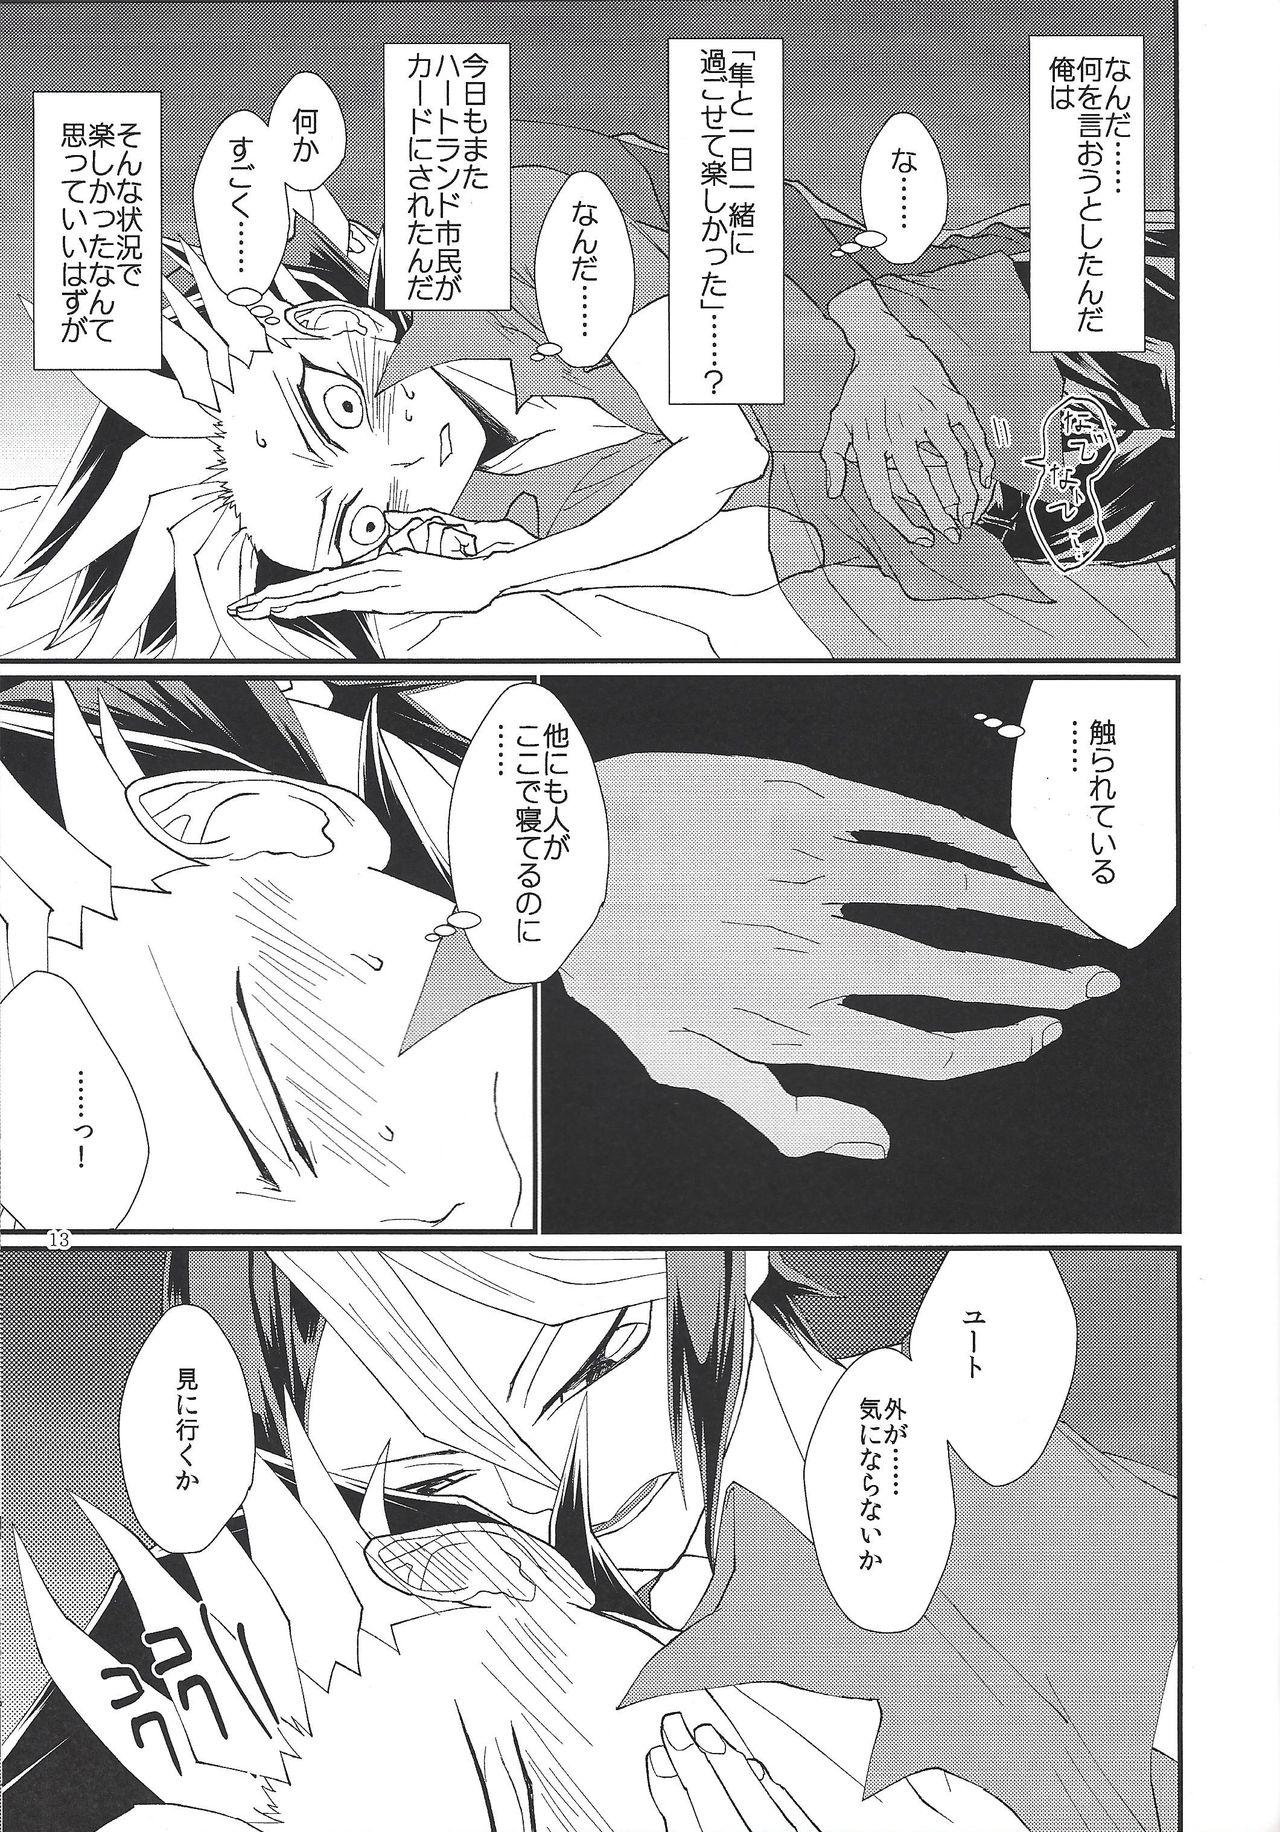 Transsexual Date - Yu-gi-oh arc-v Viet - Page 12